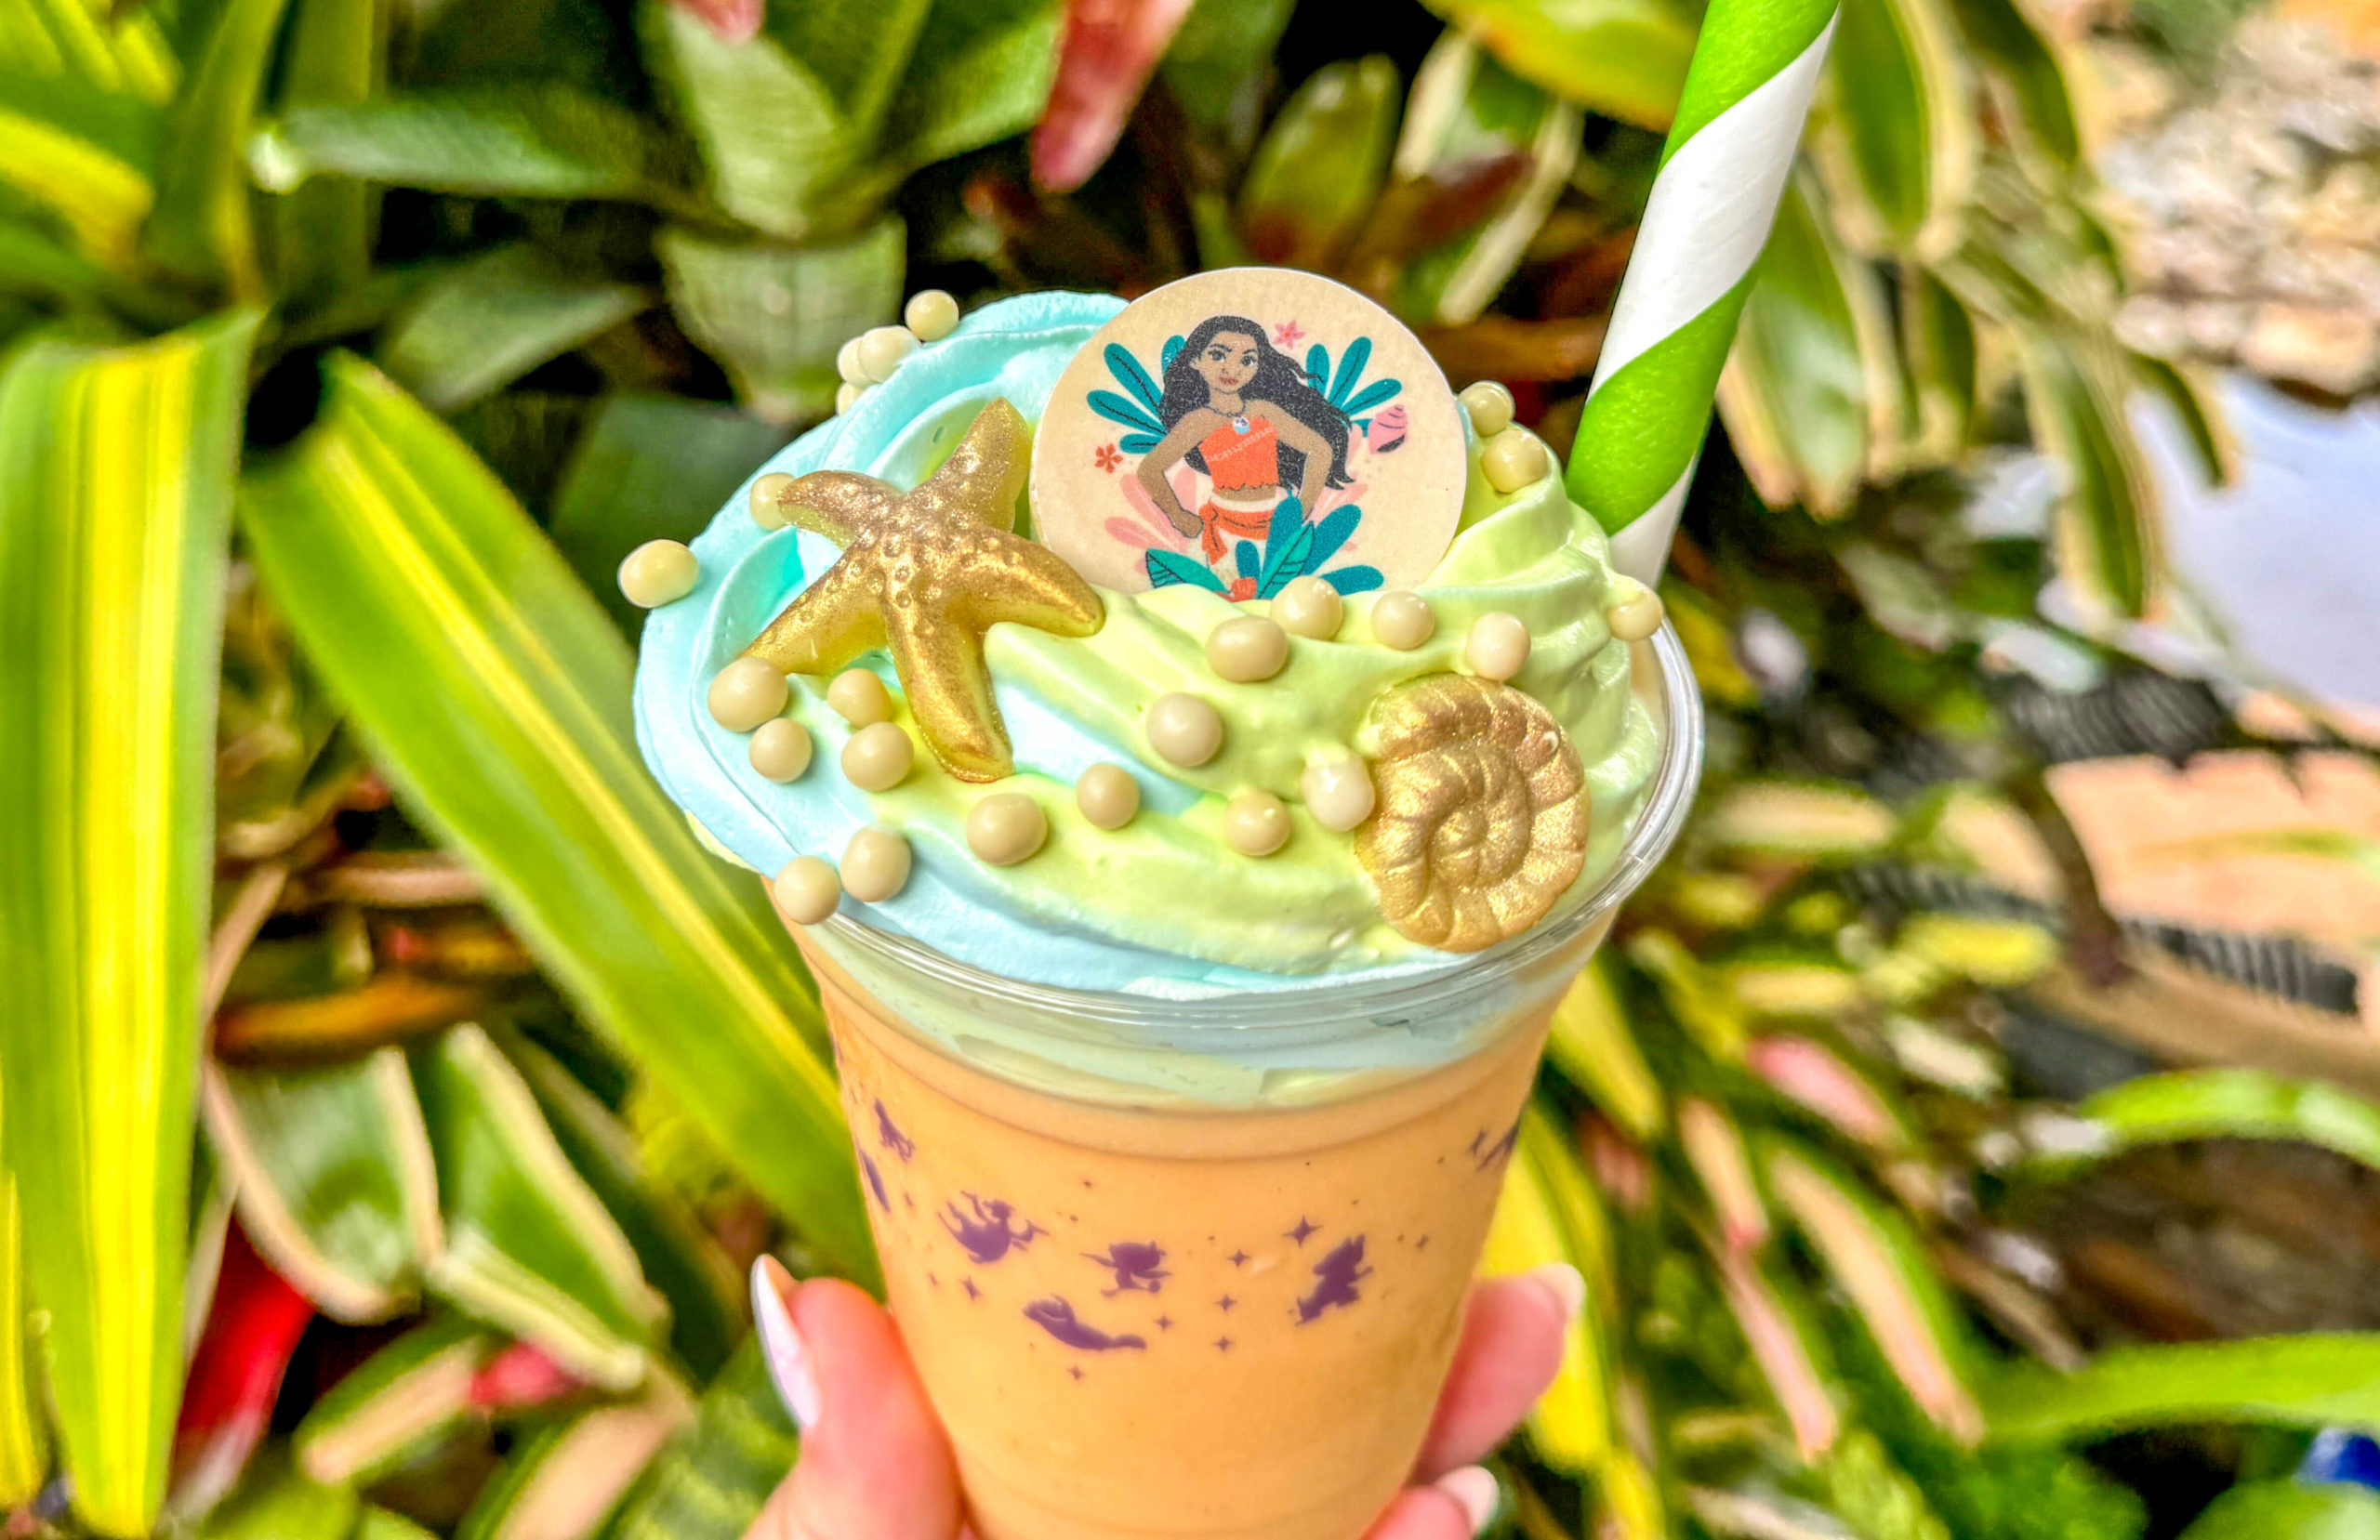 REVIEW: Moana Milk Shake for Women's History Month at EPCOT - WDW News Today